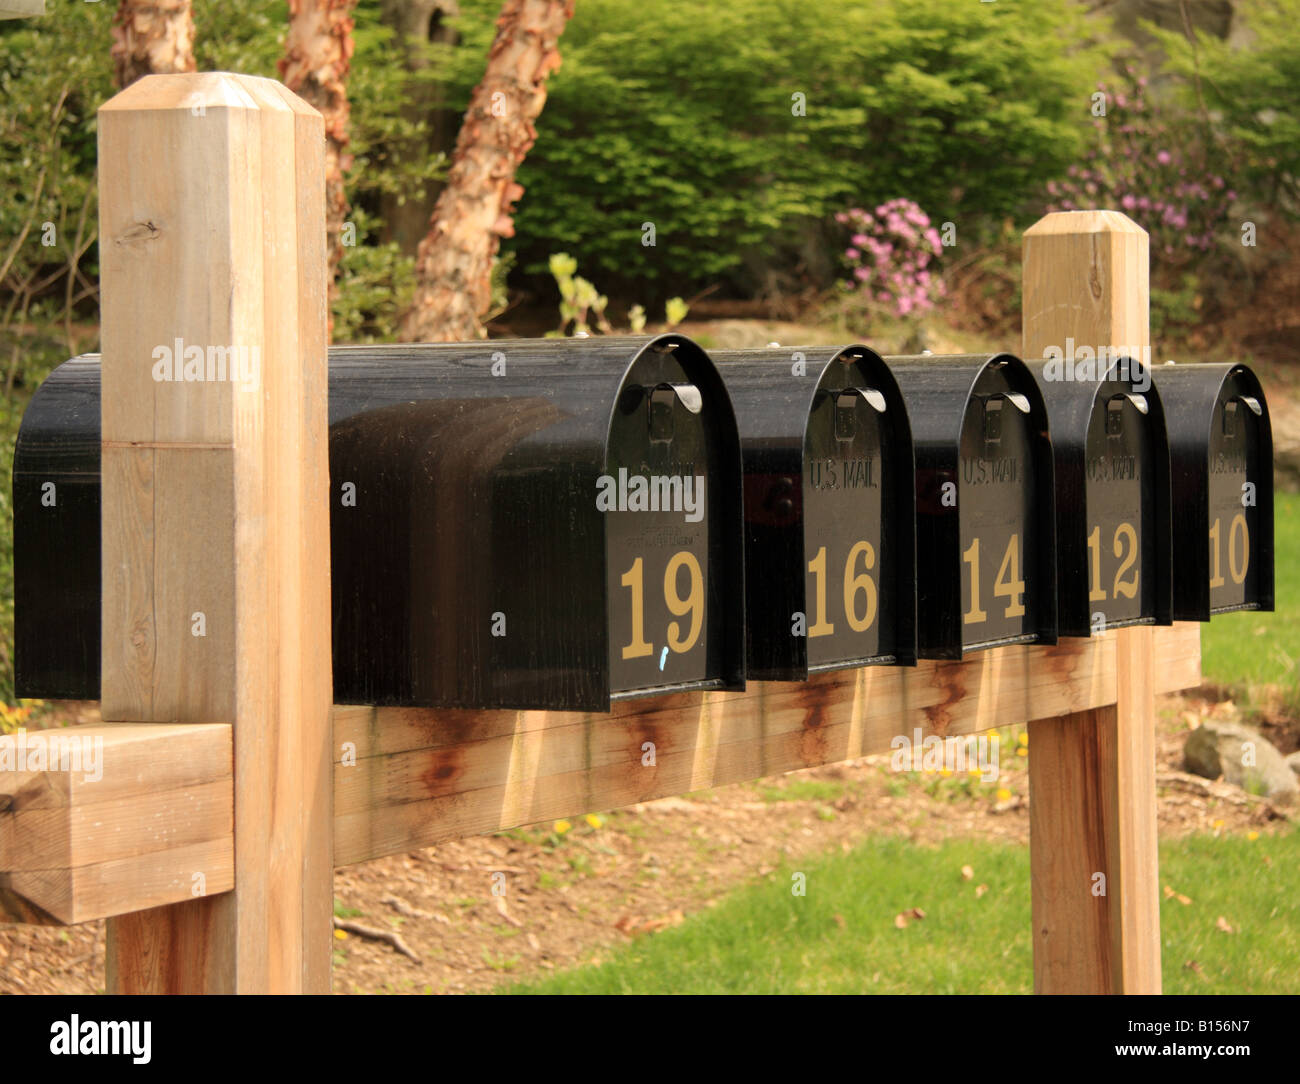 A row of US Mail boxes Stock Photo